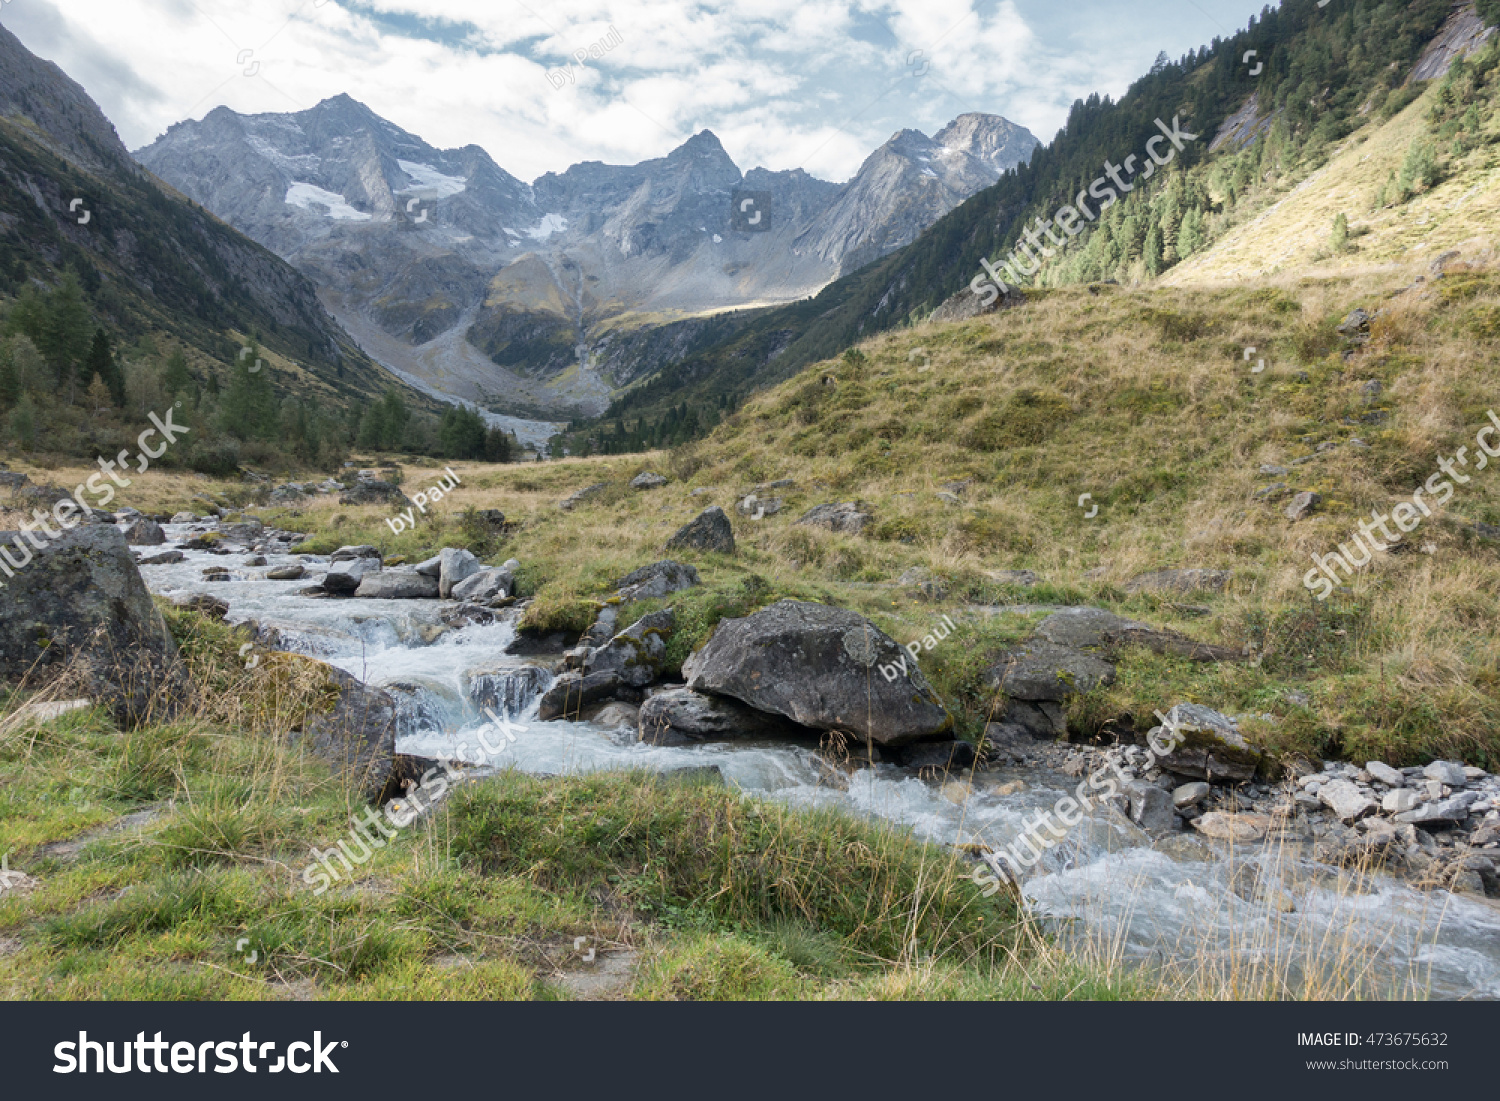 Torrent from the glaciers in the Alps #473675632